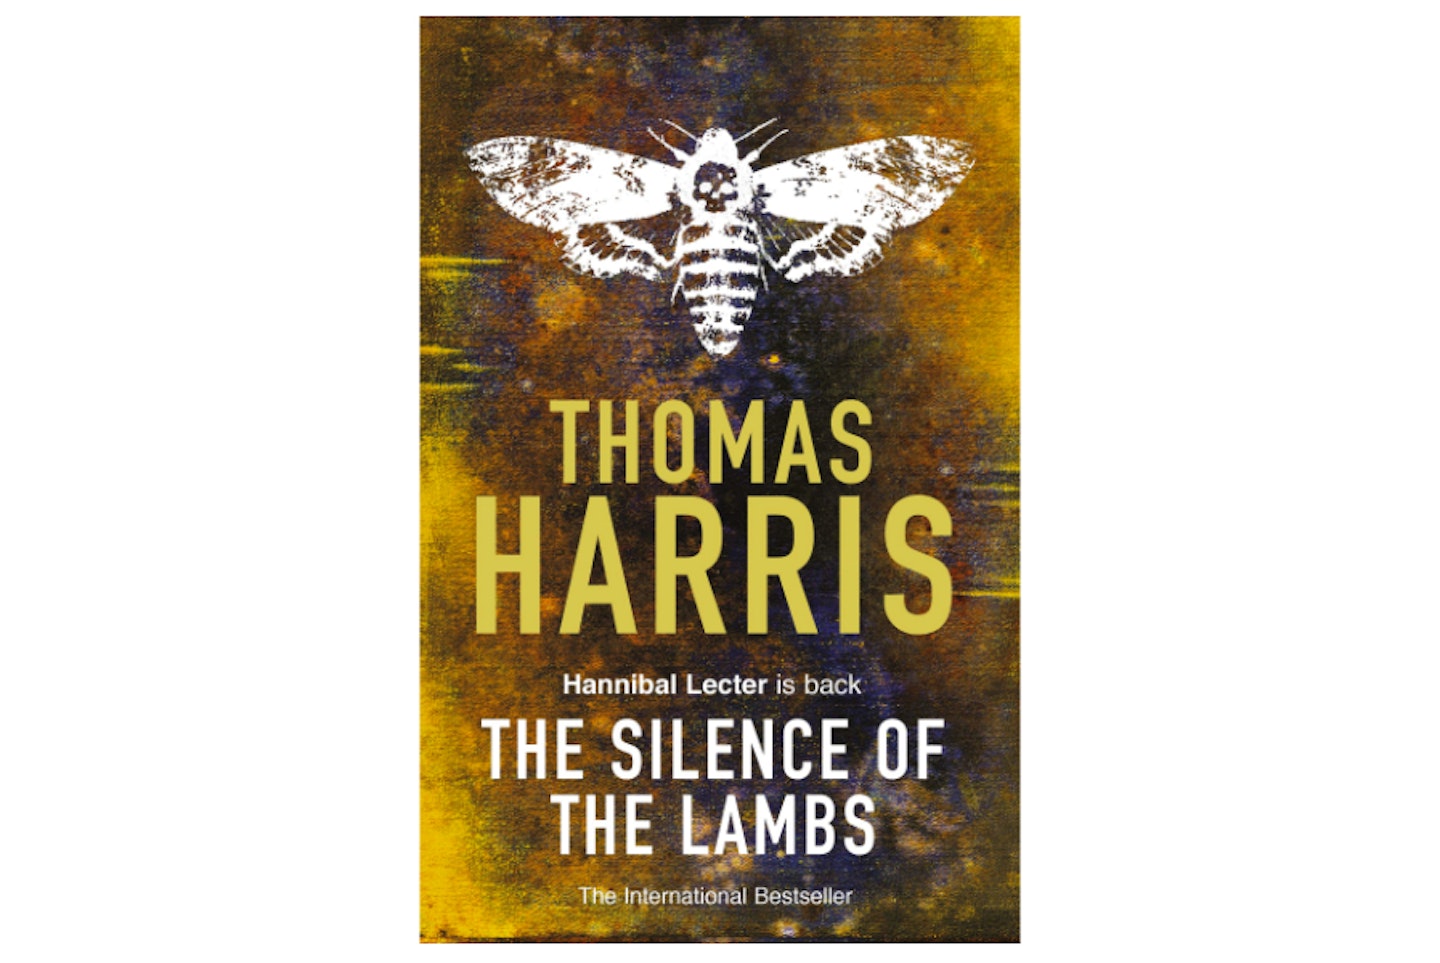 The Silence of the Lambs by Thomas Harris, £6.47